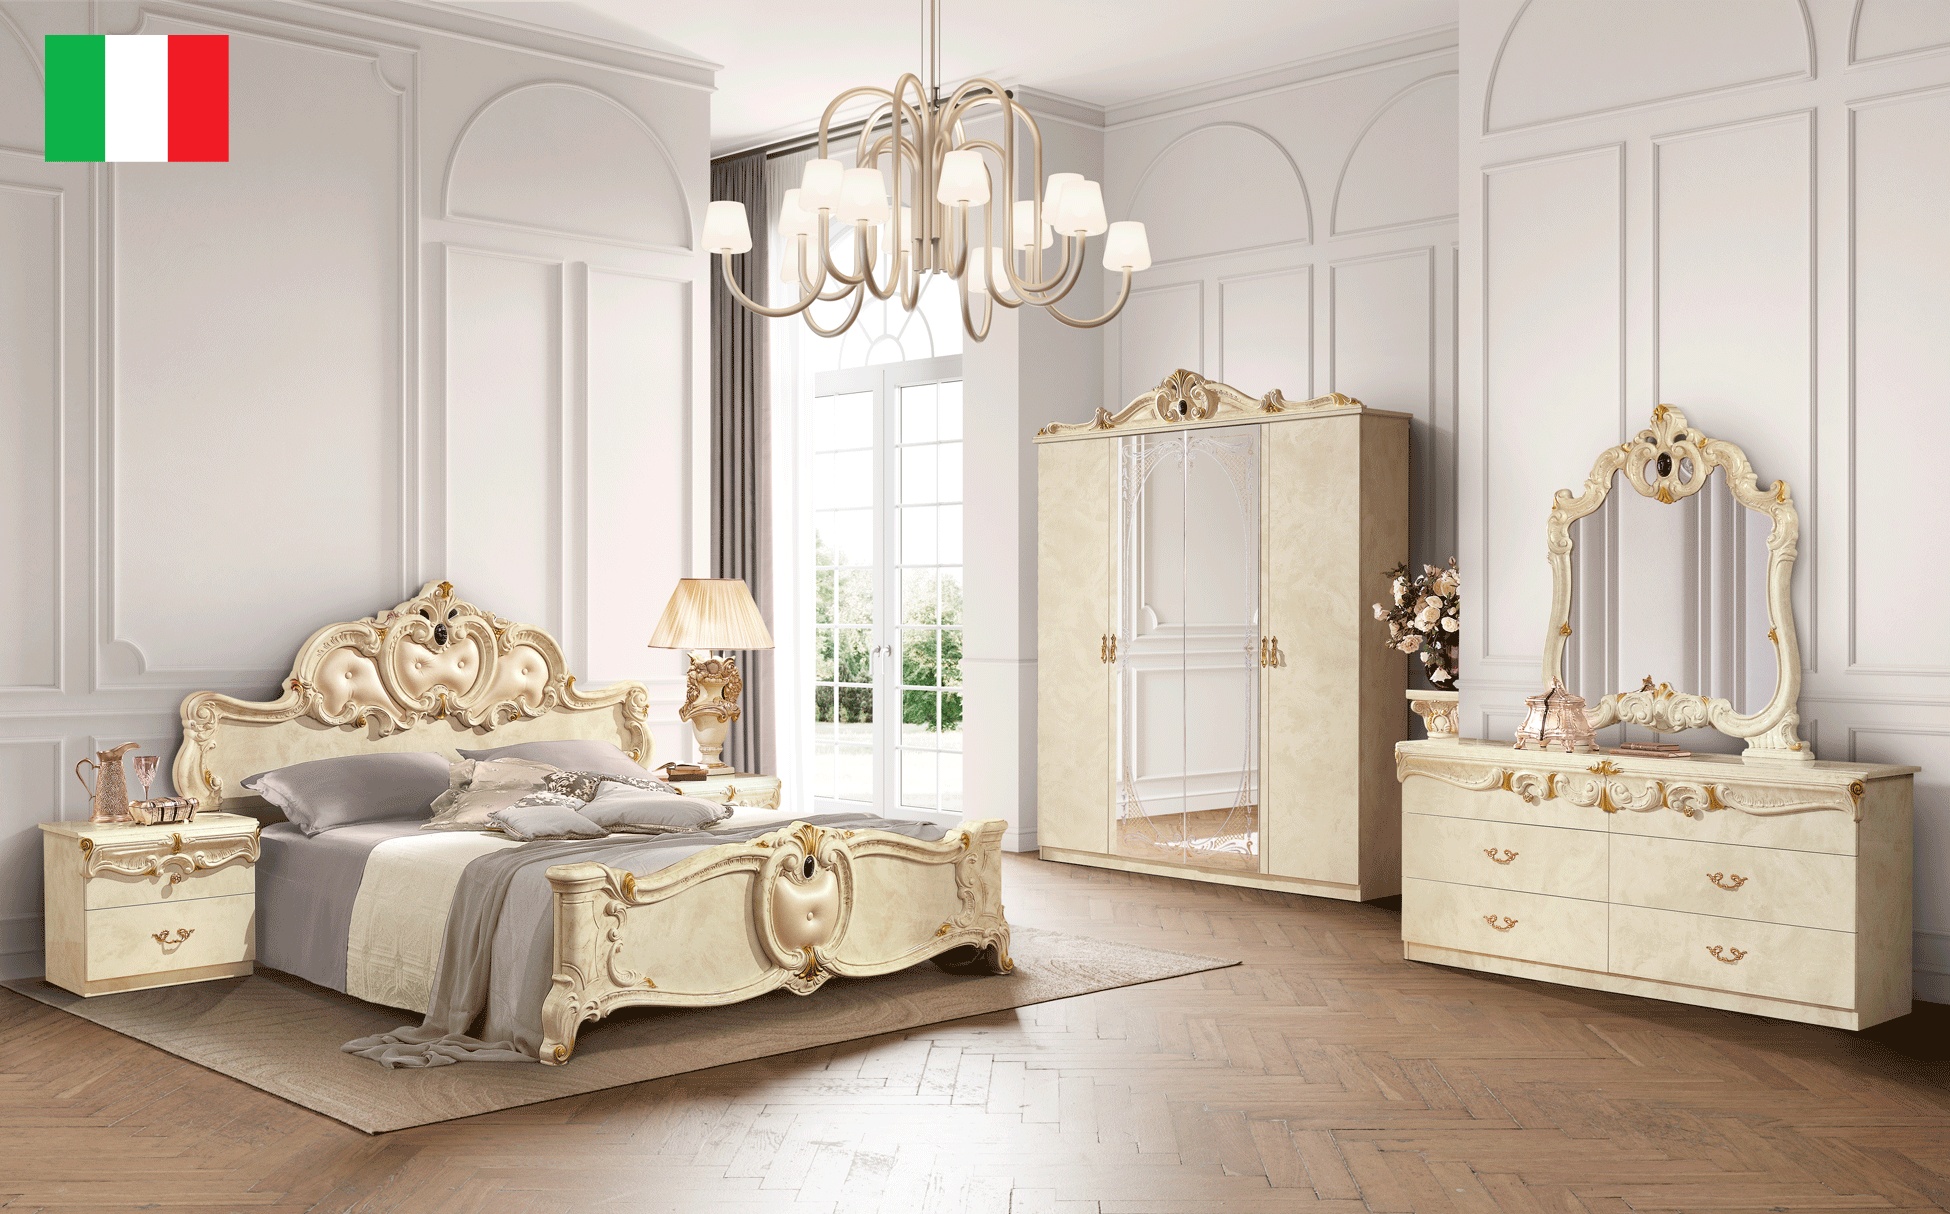 Dining Room Furniture Chairs Barocco Ivory Bedroom